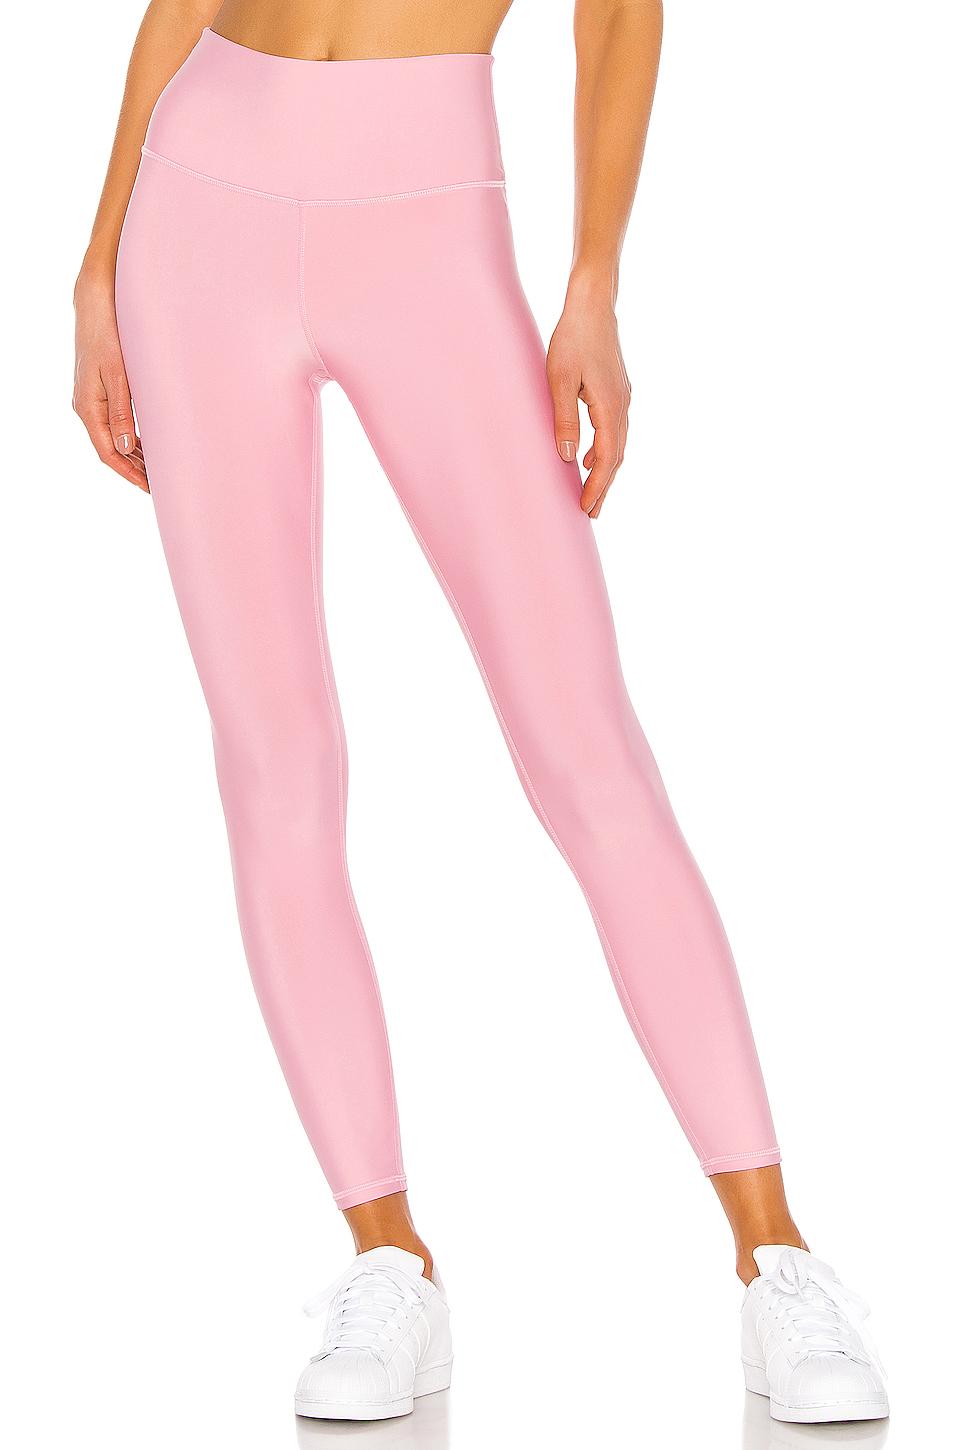 Alo Yoga 7/8 High Waist Airlift Legging in Pink - Lyst